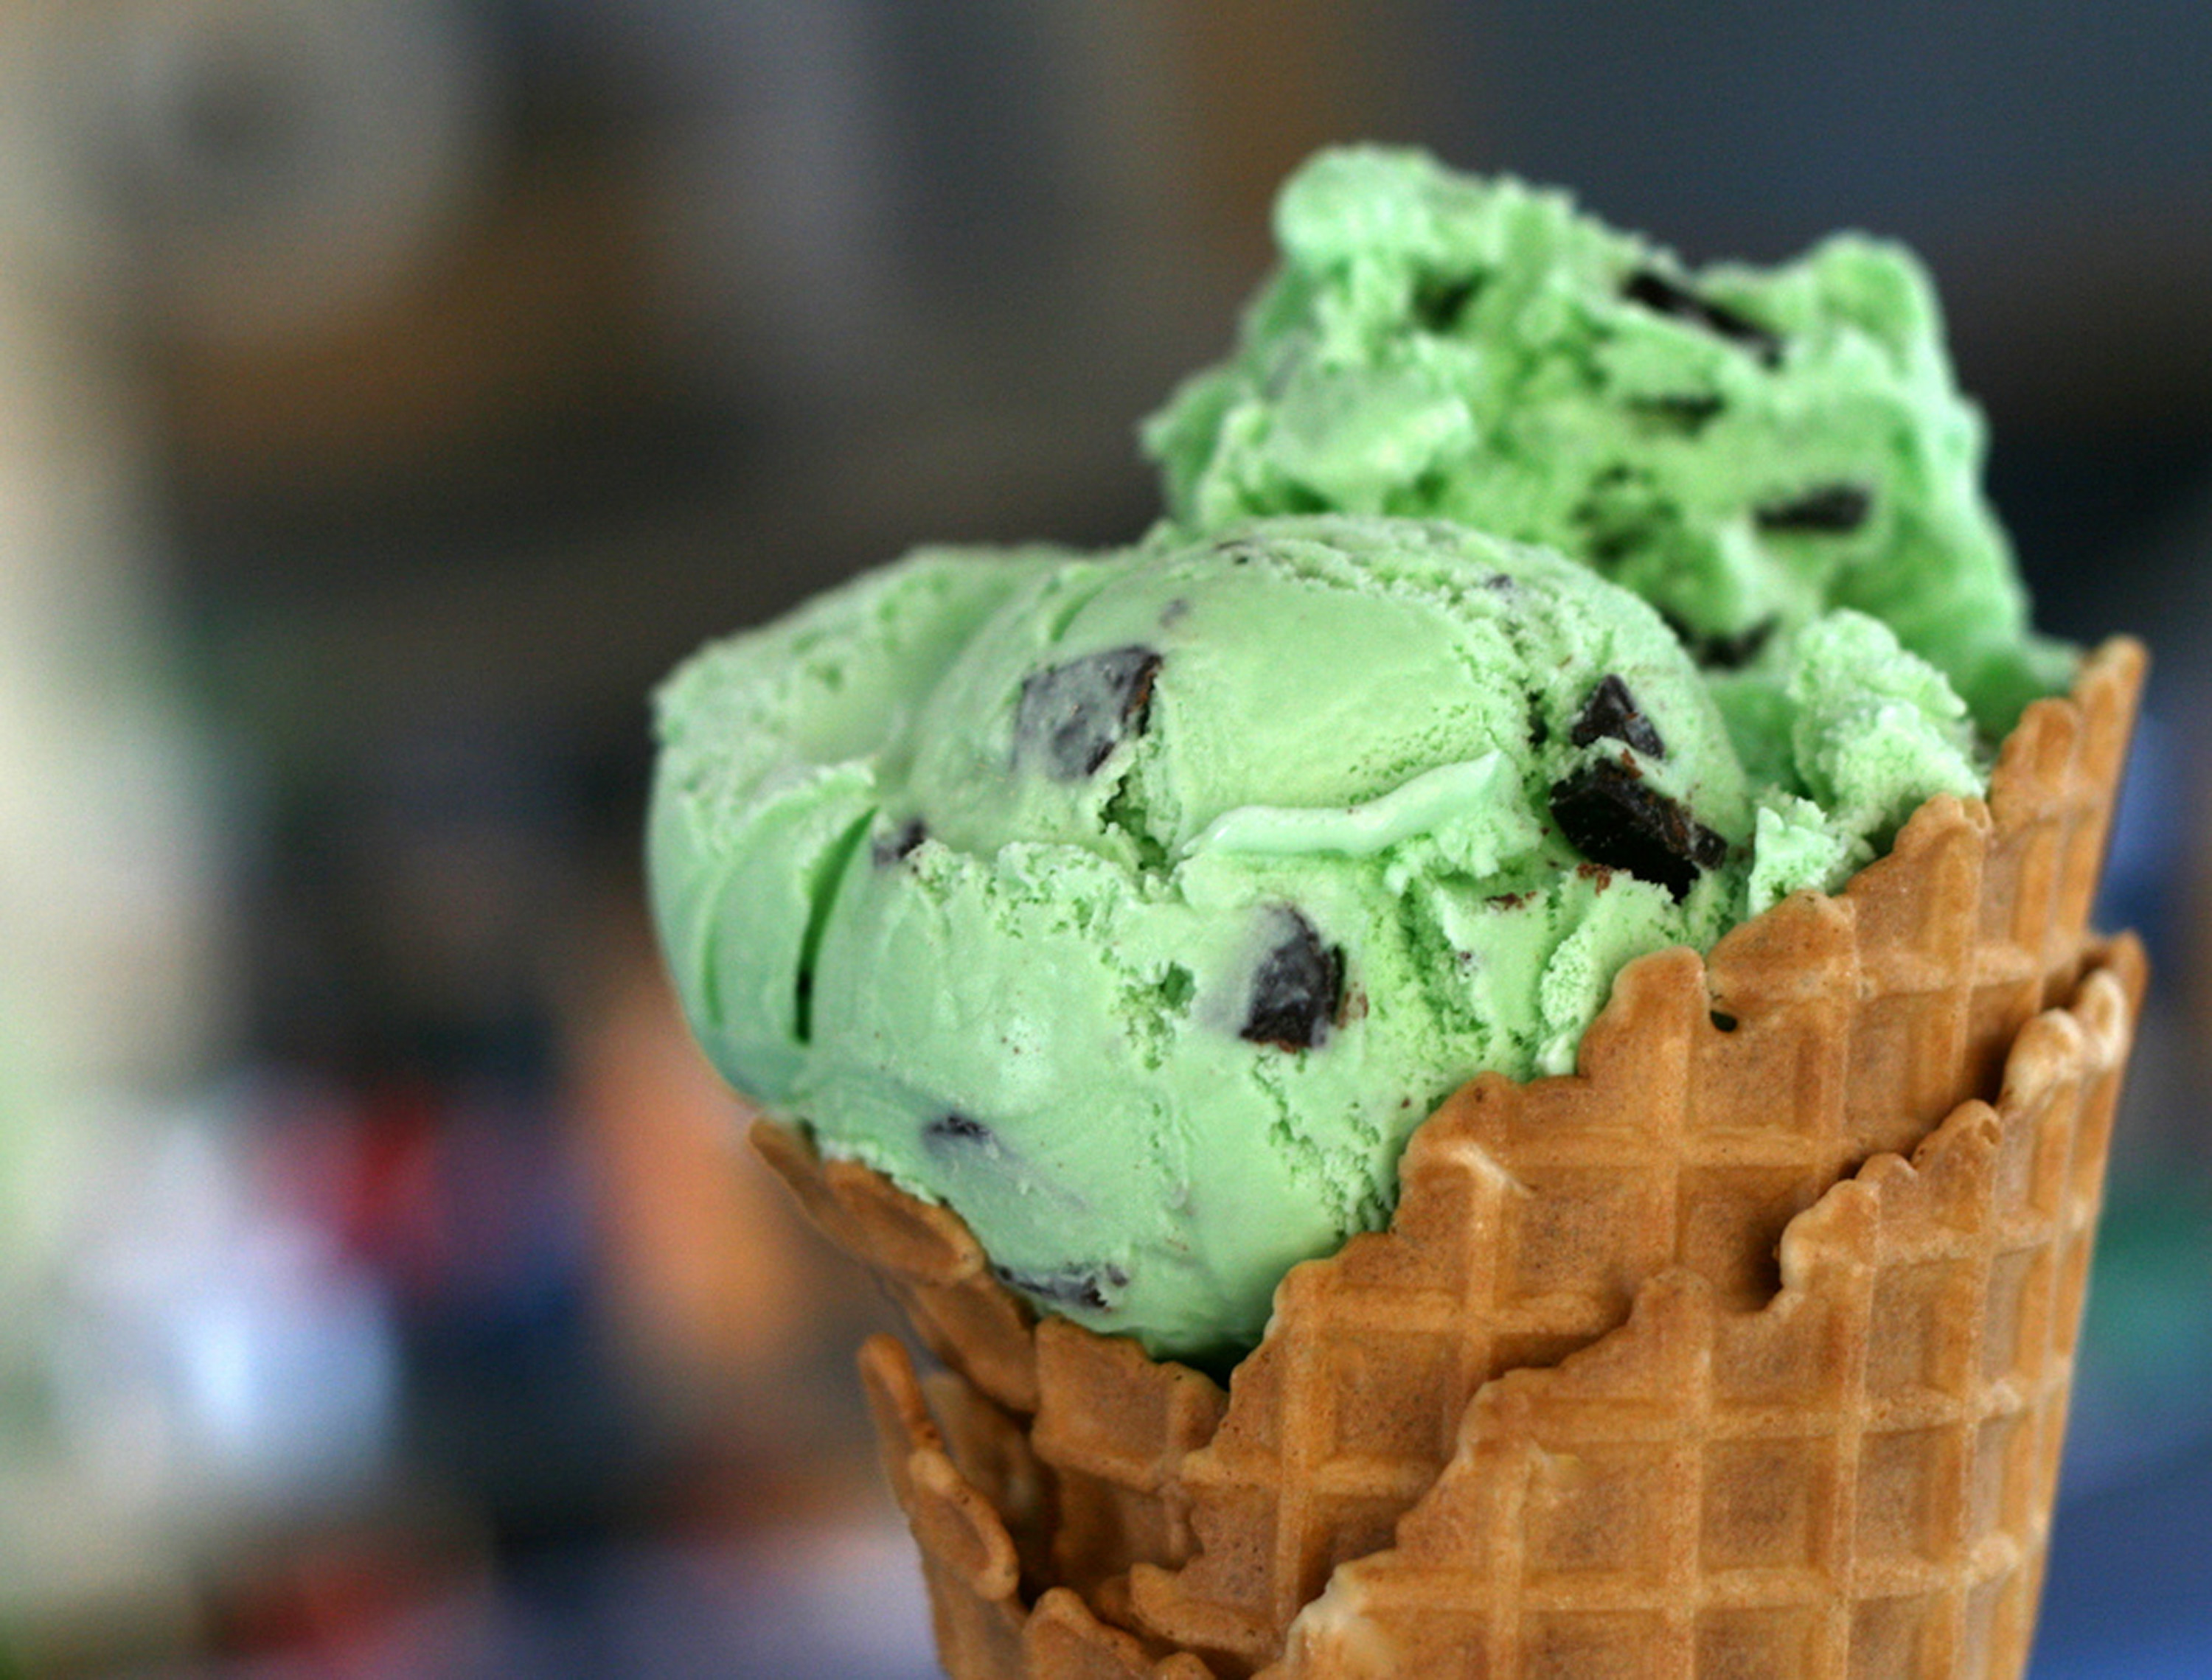 Mint chocolate chip ice cream in waffle cone